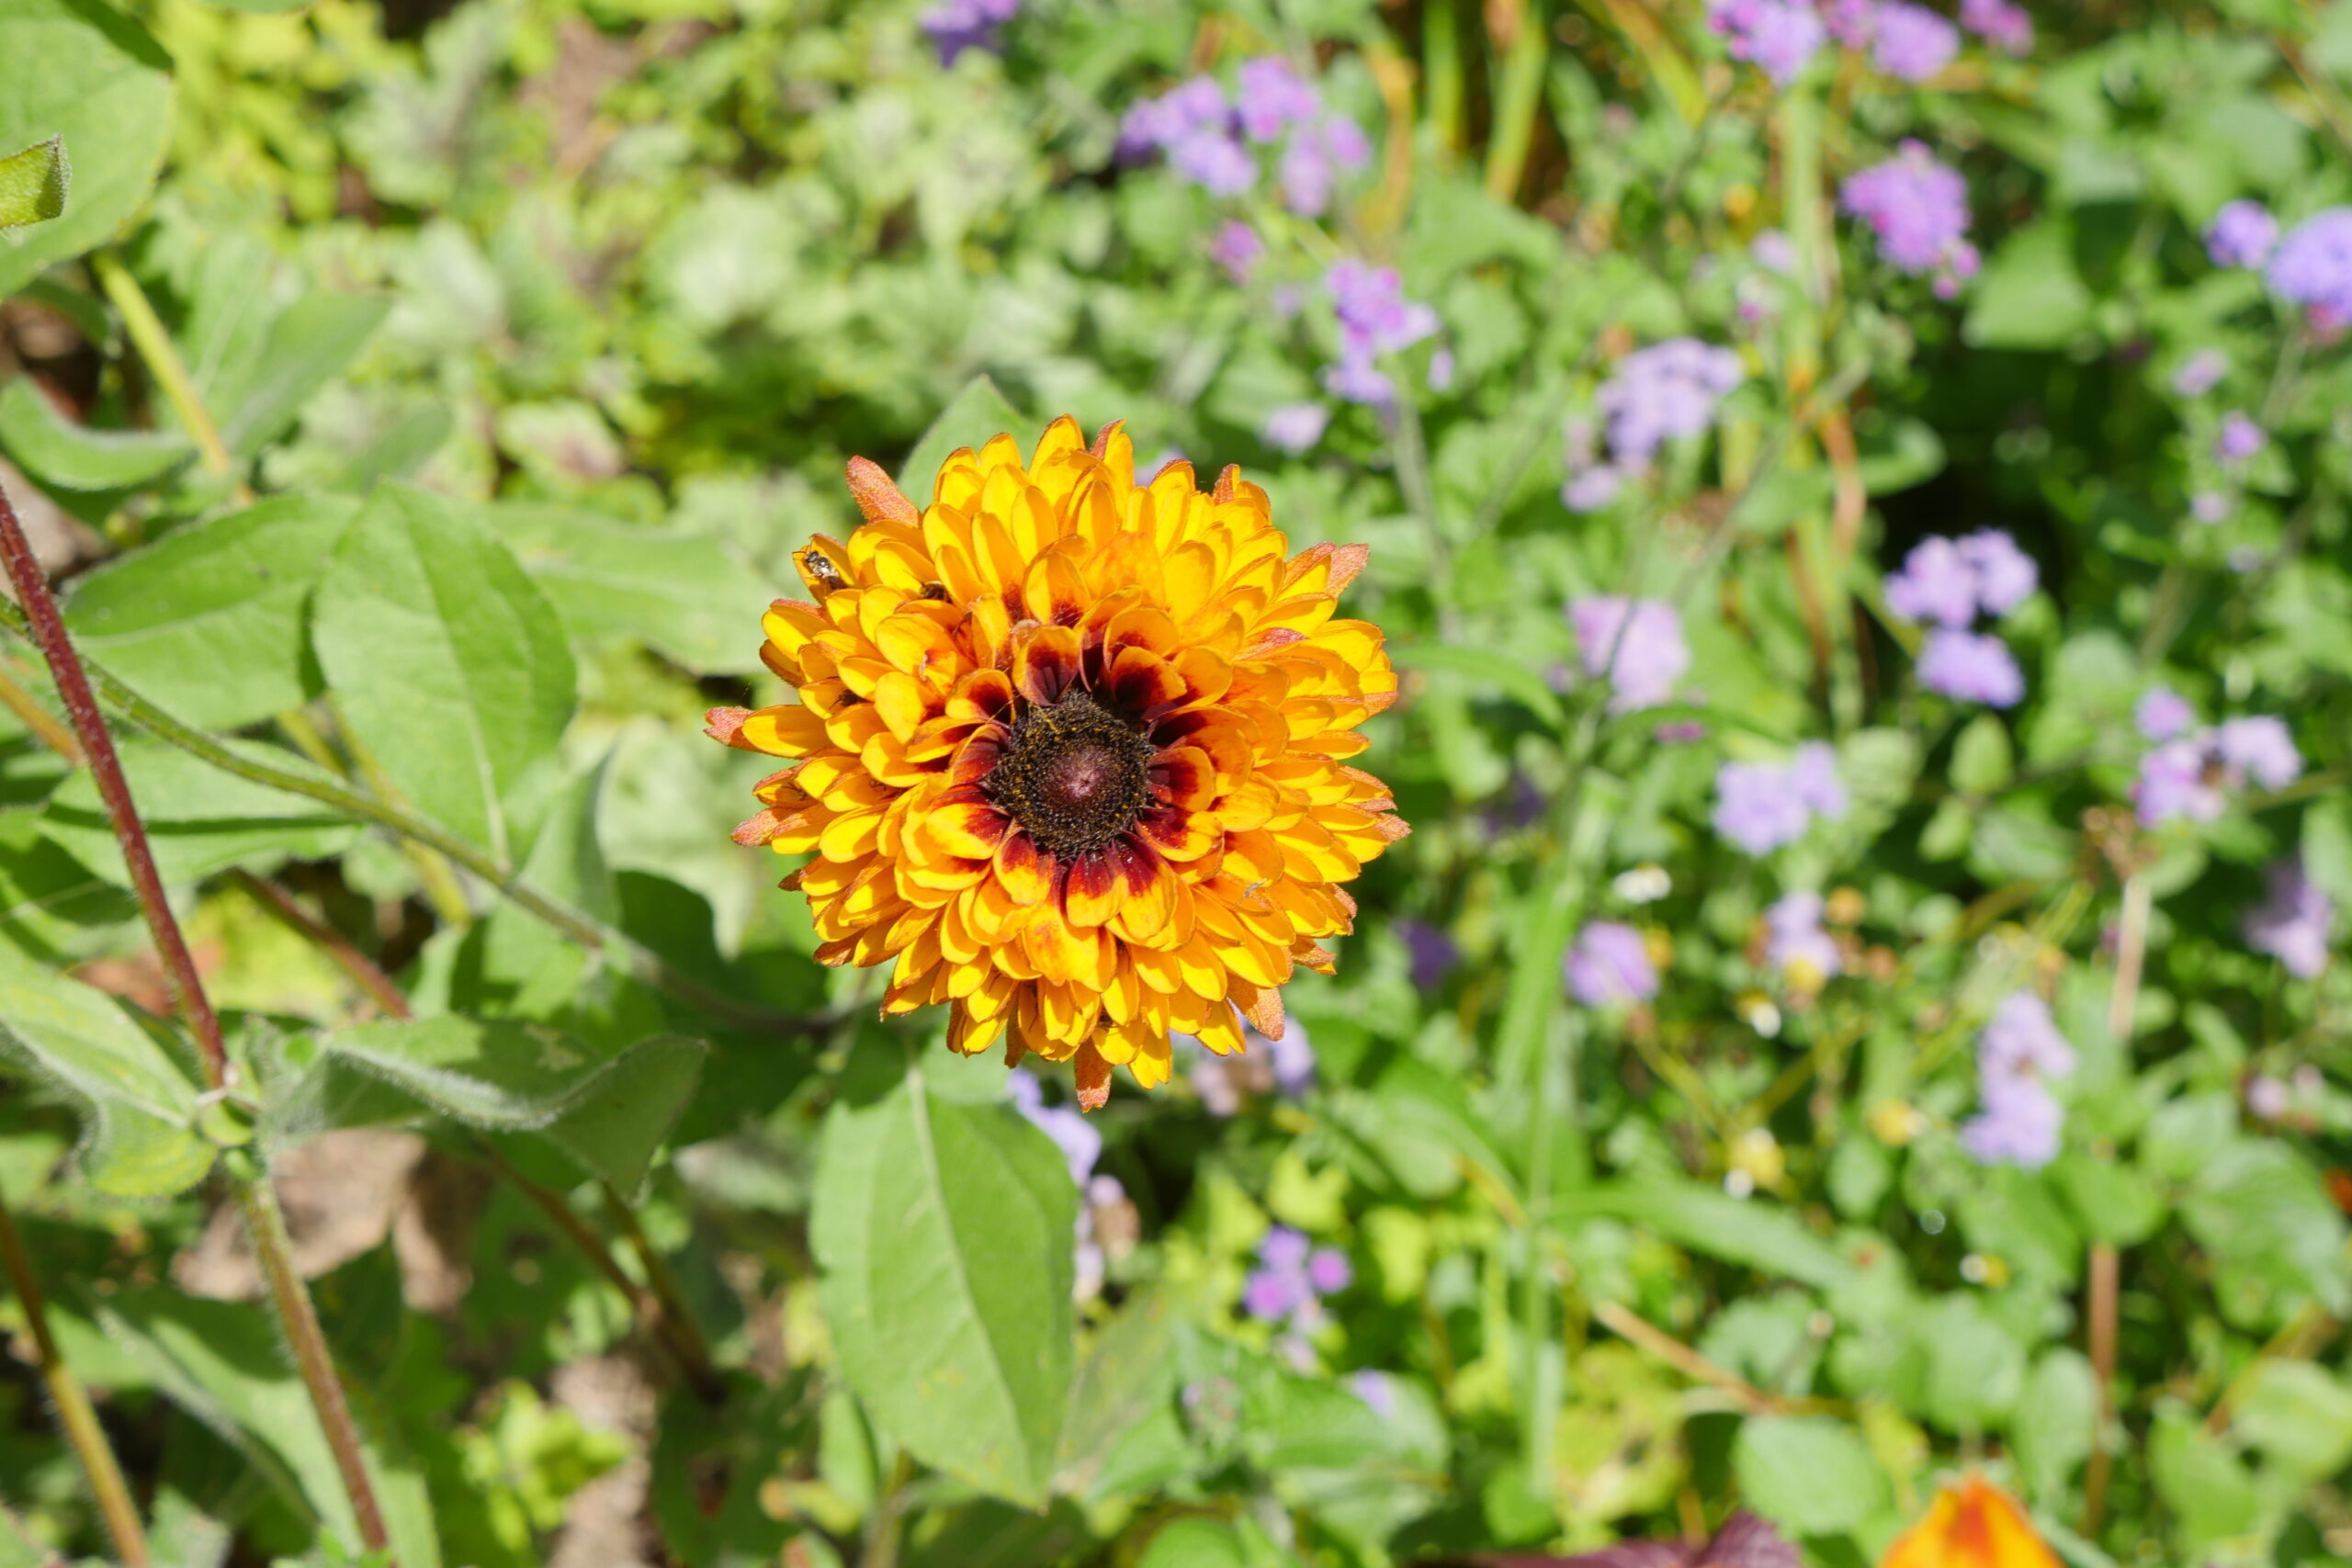 This Rudbeckia is similar to the variety Goldilocks. The flower has the traditional central brown disk where the actually flowers are and instead of the usual single row of 